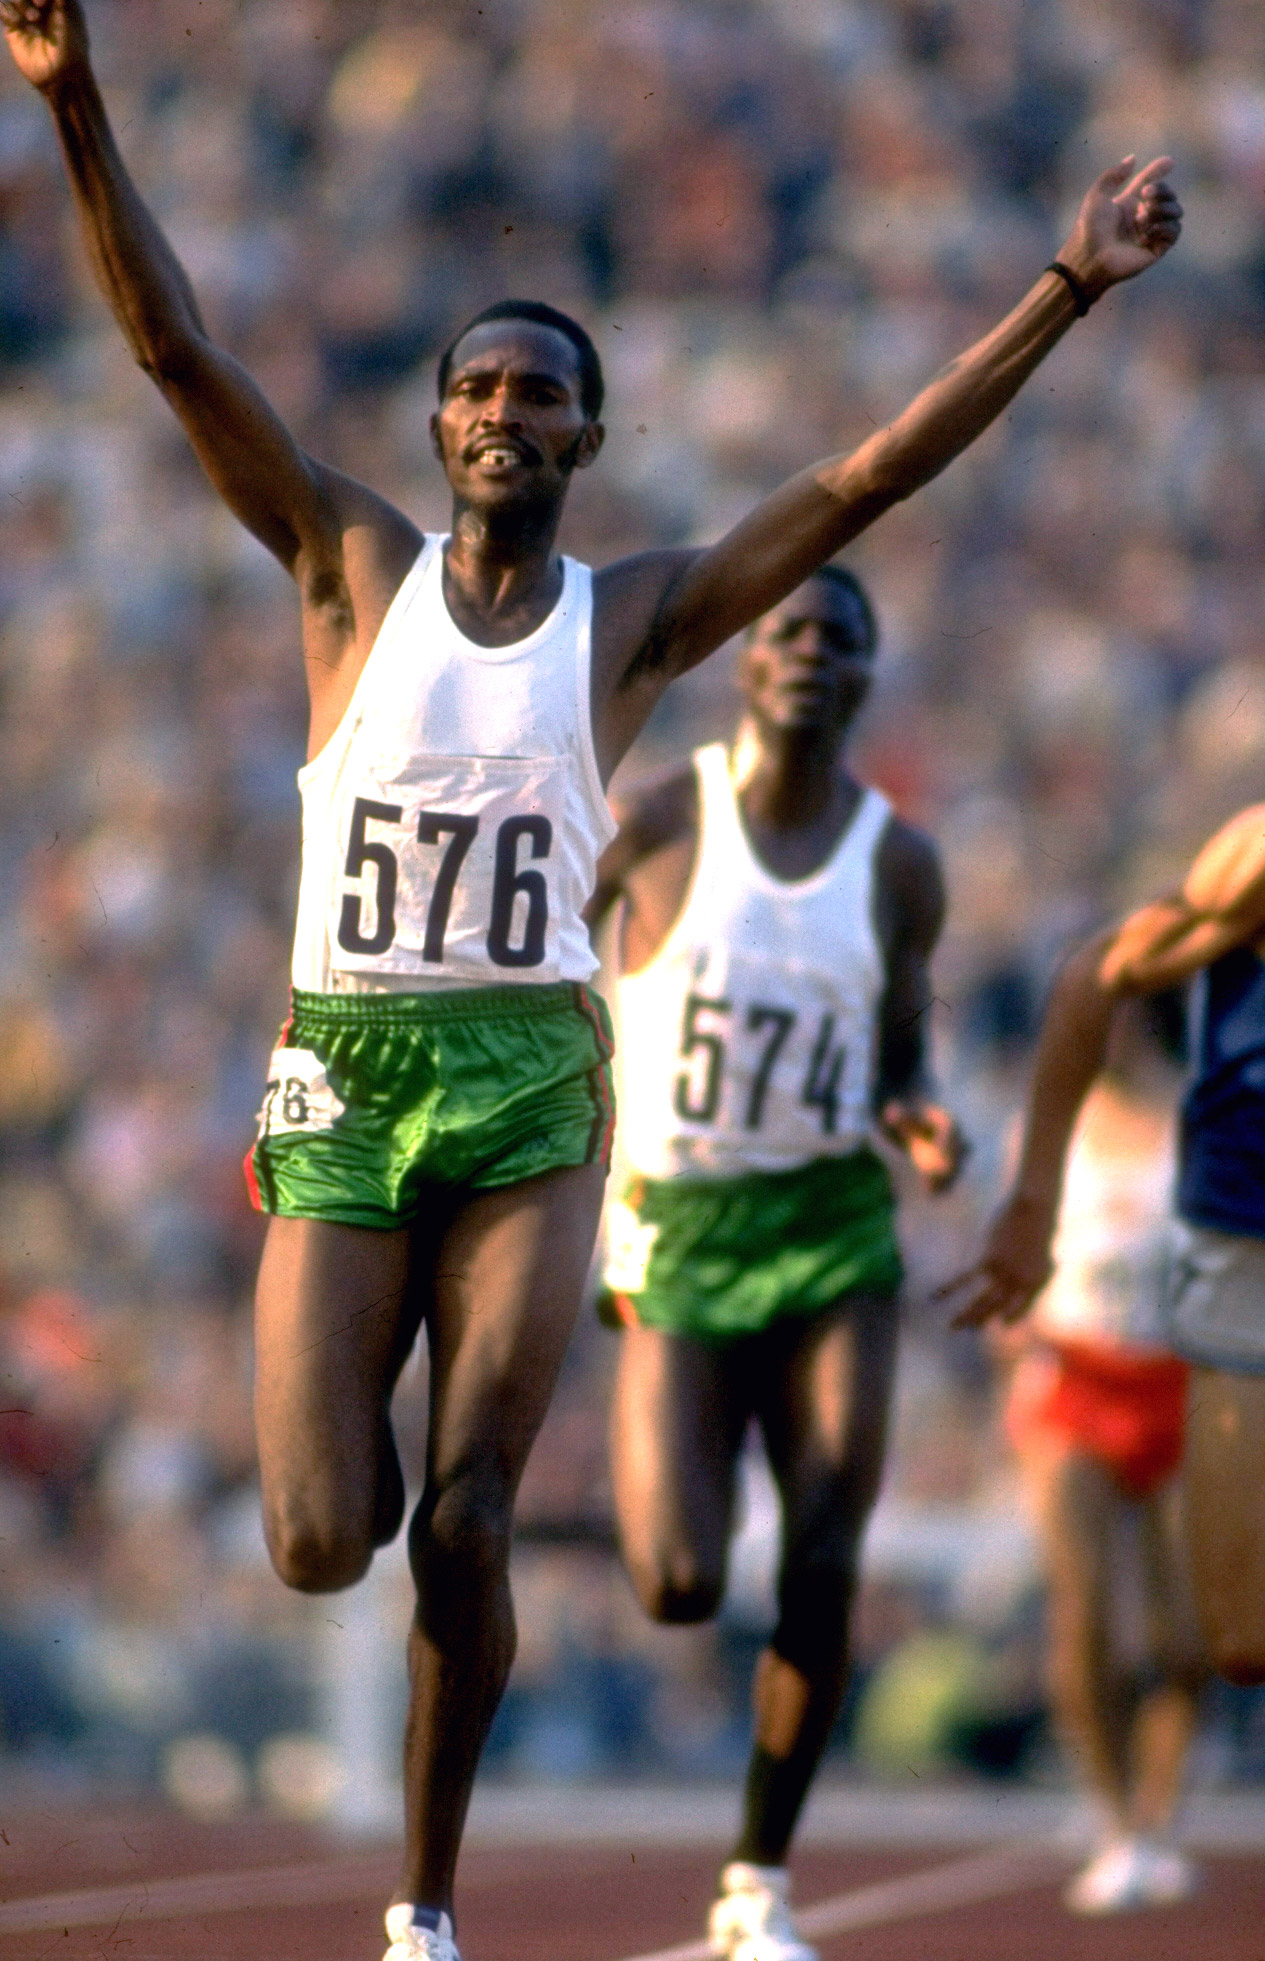 Kenyan track star Kipchoge Keino finishing ahead of teammate Ben Jipcho (574) in the 3,000-meter steeplechase final at the 1972 summer Olympics in Munich, West Germany.